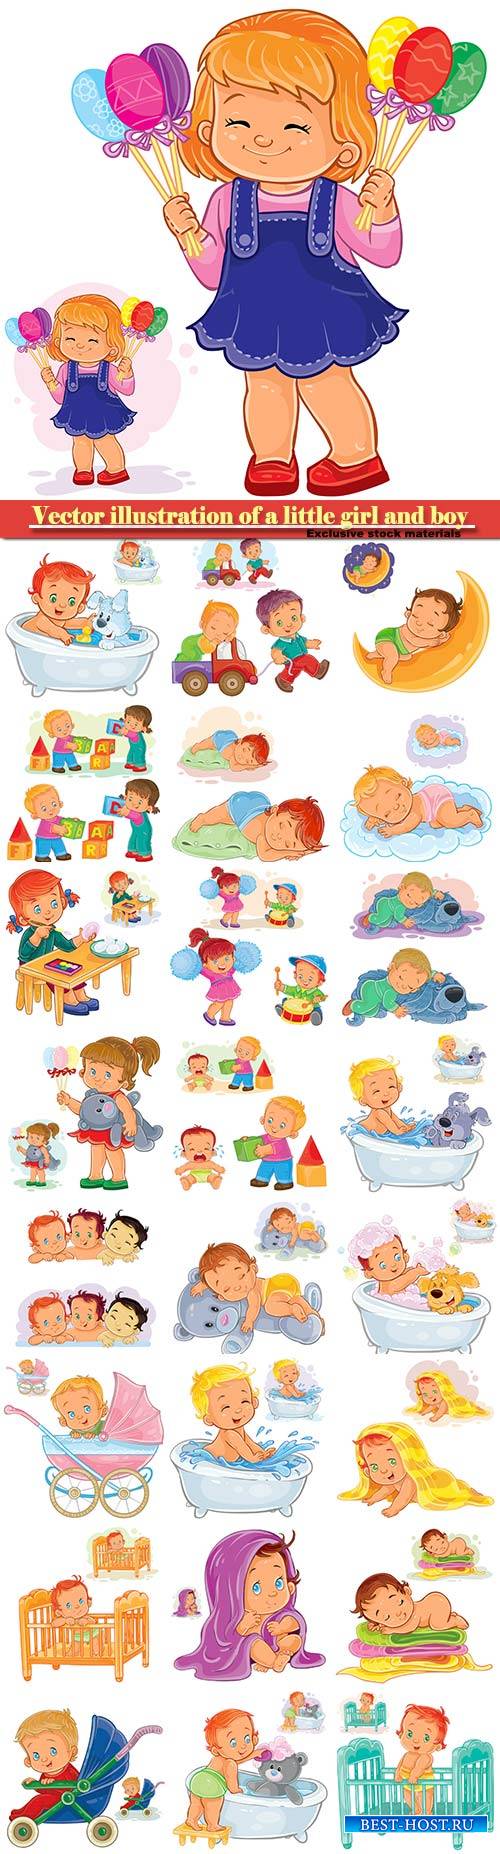 Vector illustration of a little girl and boy playing